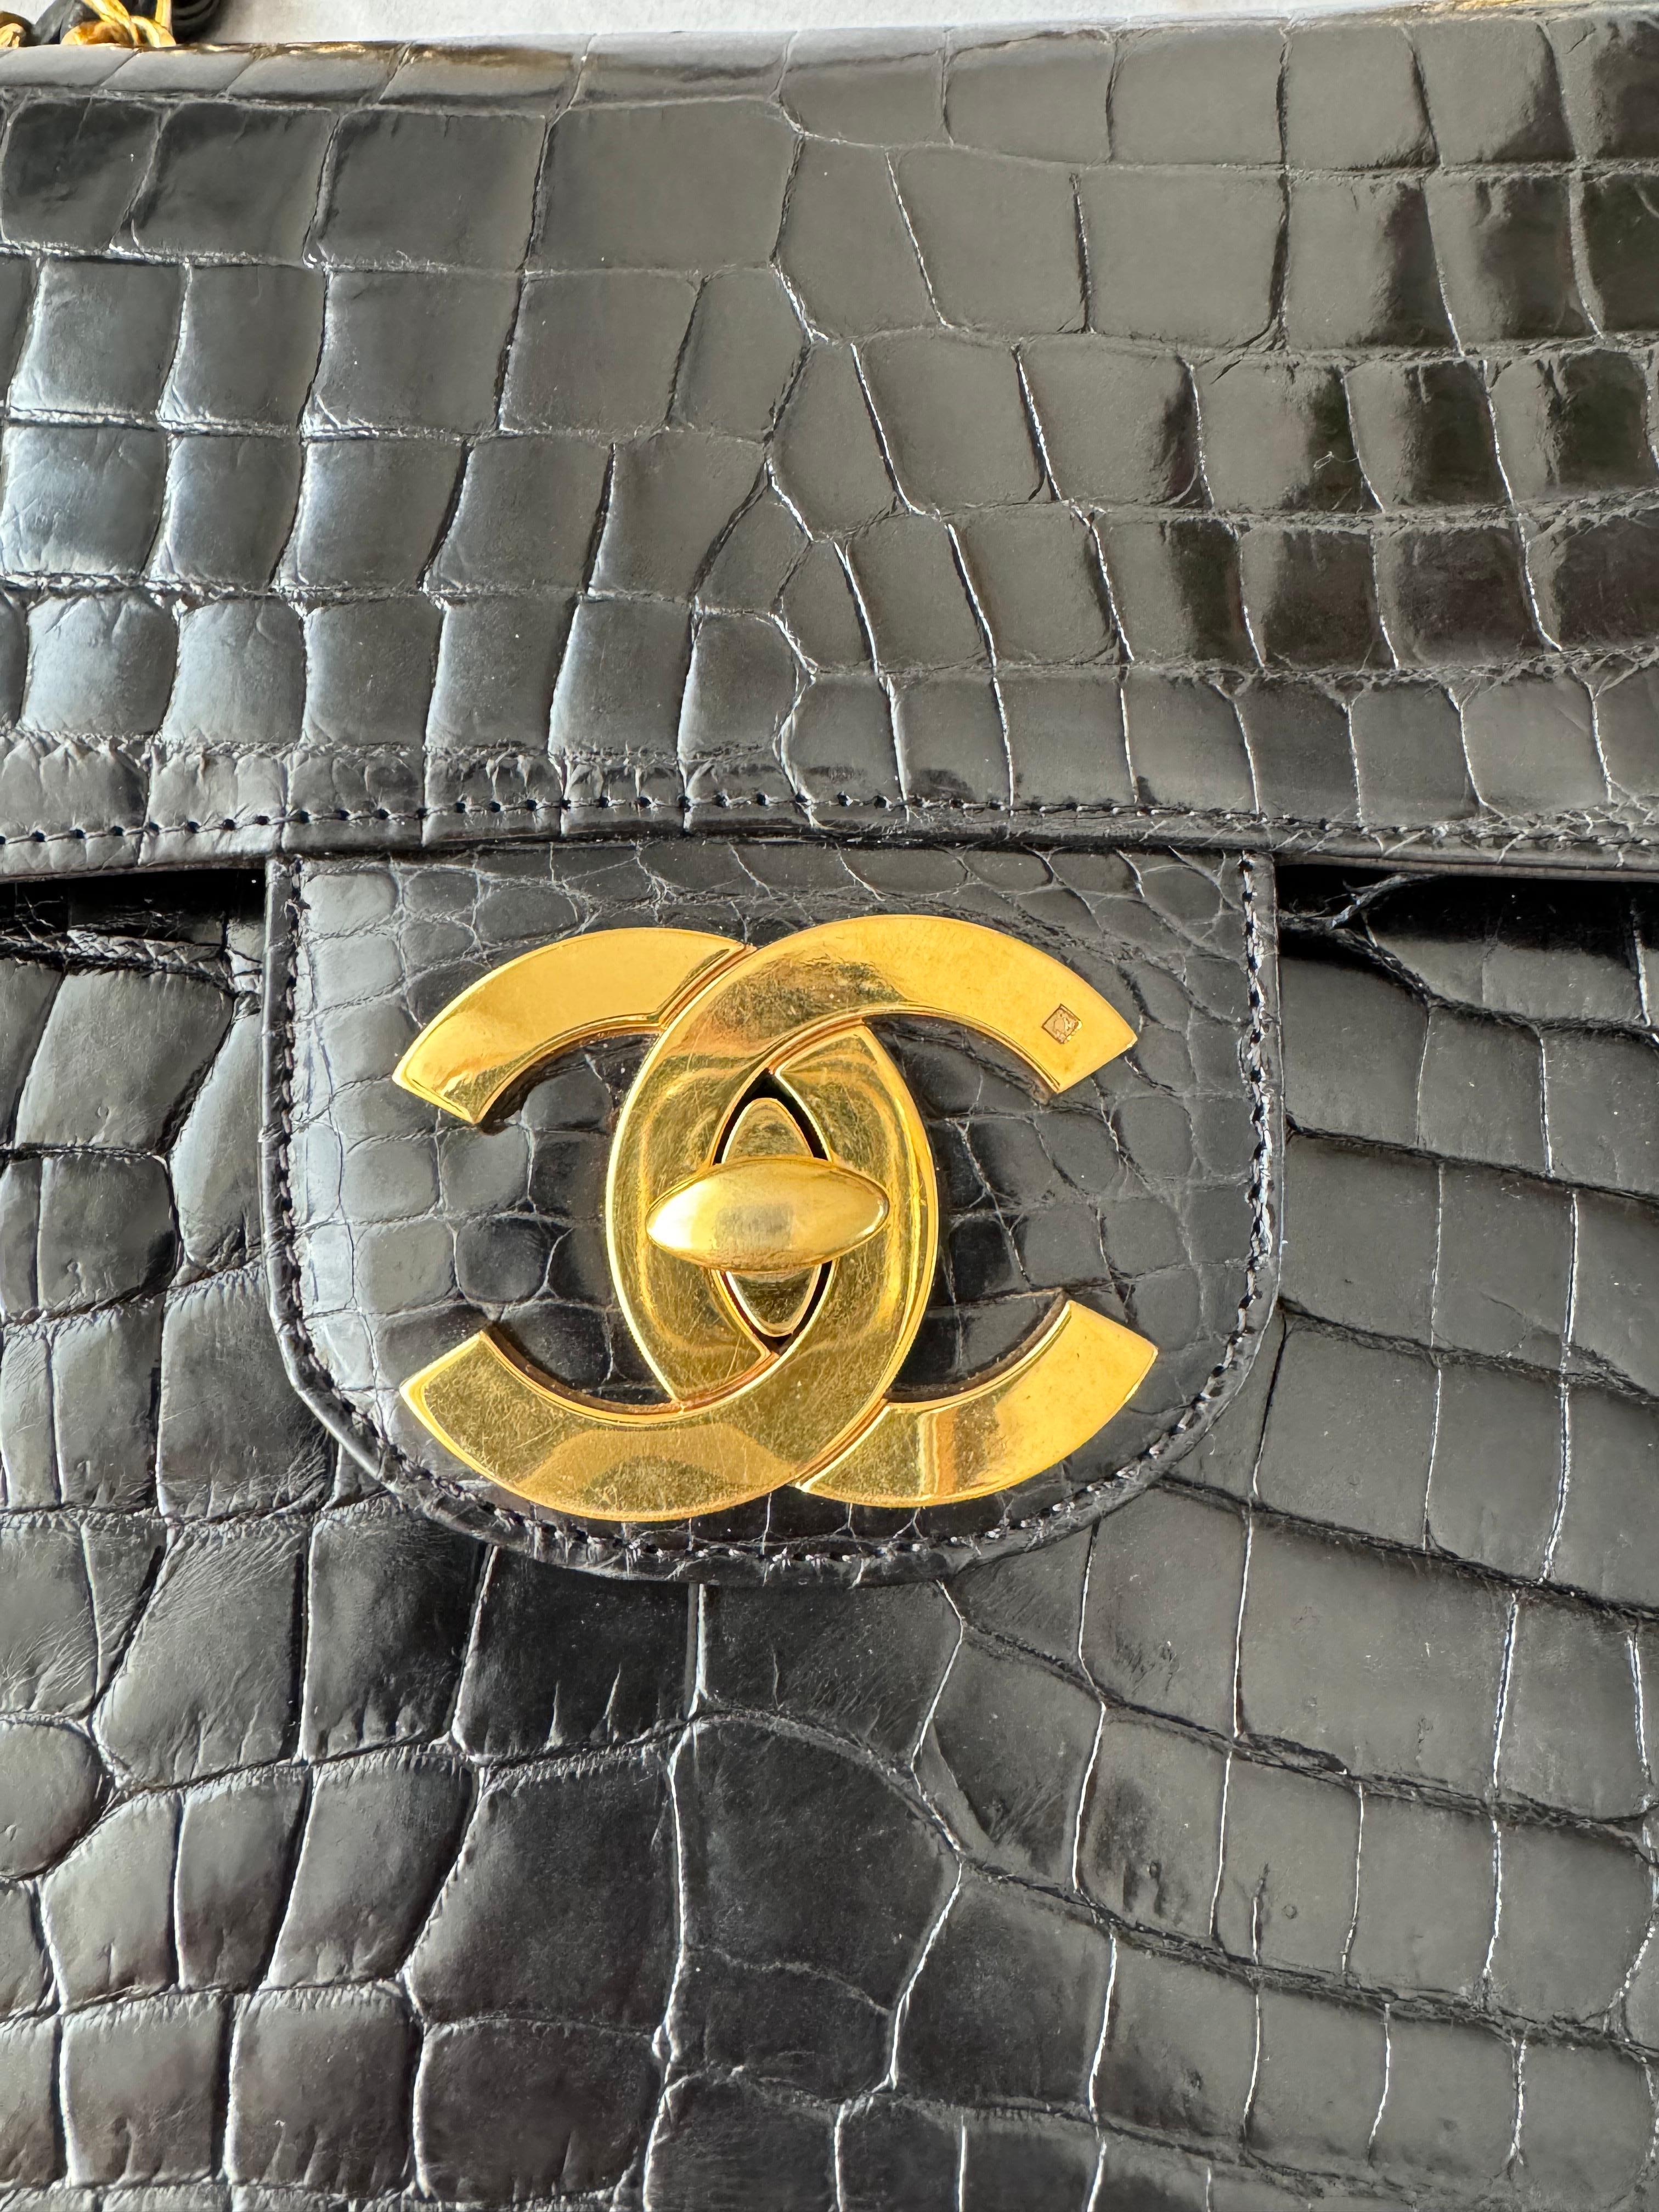 Chanel Vintage Crocodile Maxi Flap Bag Series 4 (1996-1997)

Extremely rare! Very good condition. comes with dustbag only.

Slight storage smell.